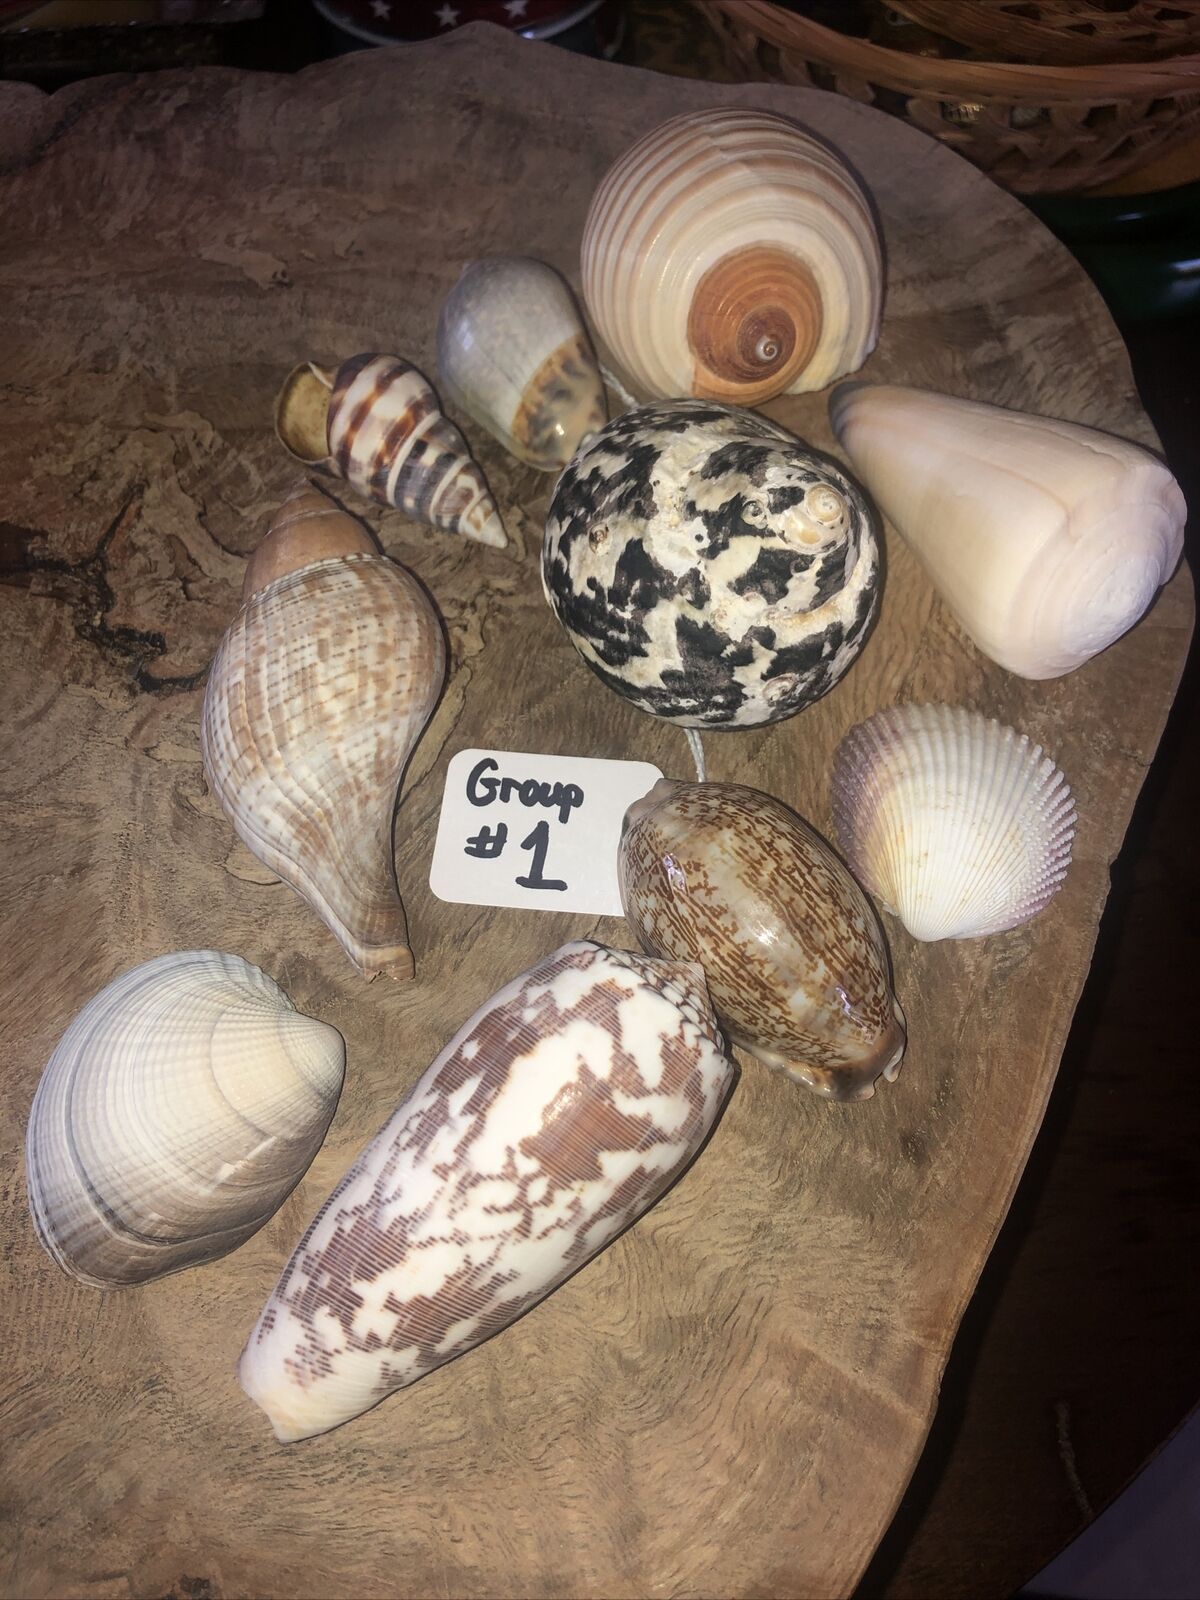 LIFELONG SEASHELL COLLECTOR COLLECTION SOLD IN # SETS -EACH SET SOLD SEPARATELY